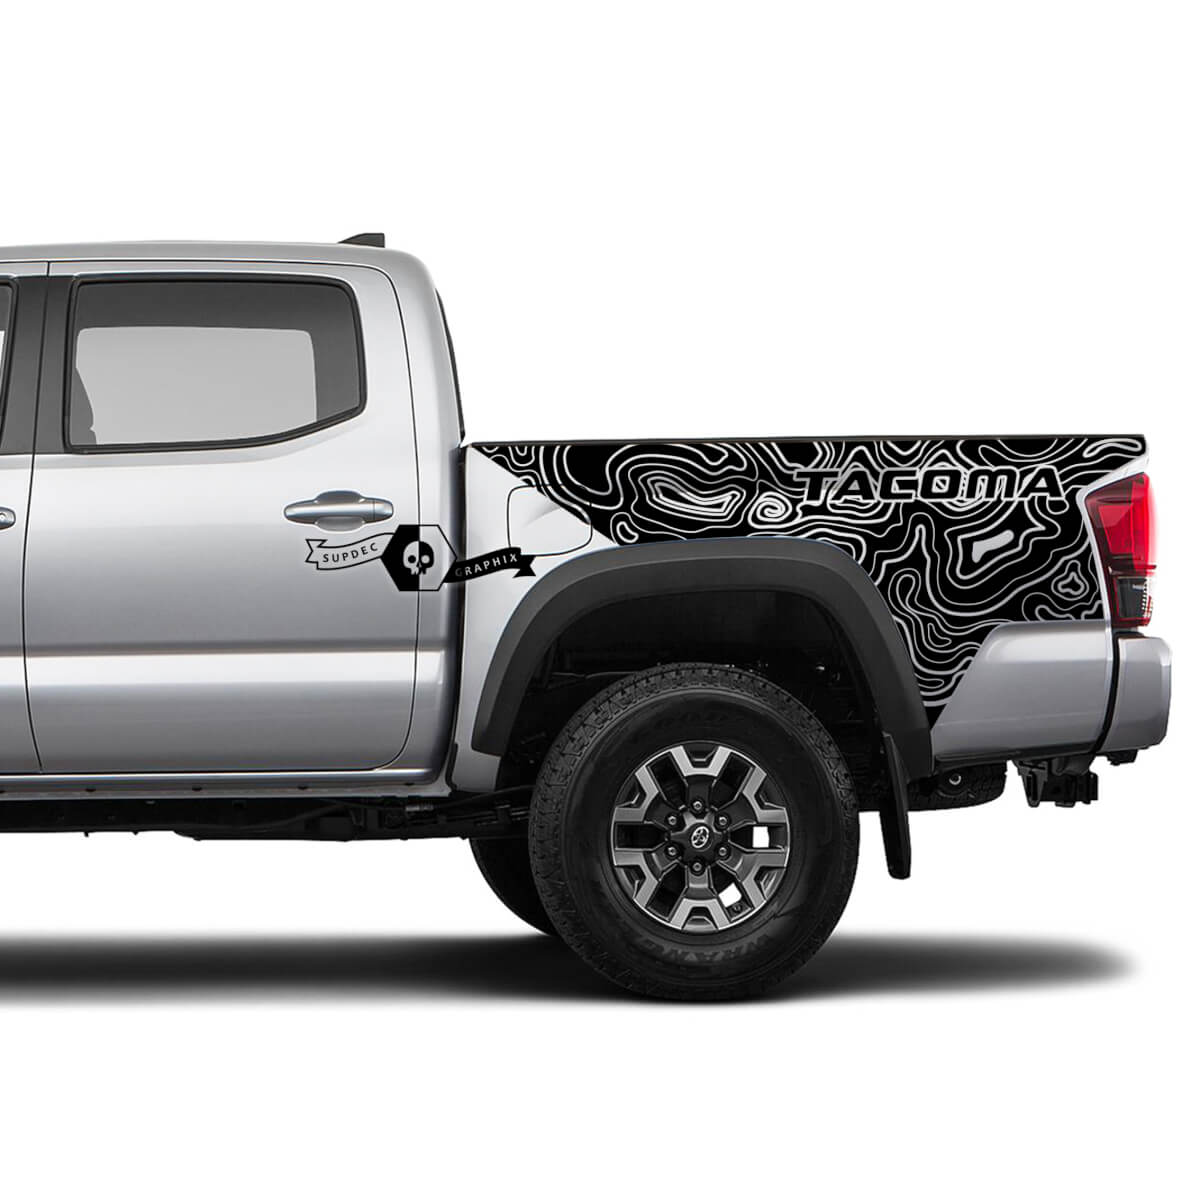 Toyota Tacoma Money Mappa Linee Bed Style Graphics Side Stripe Decal